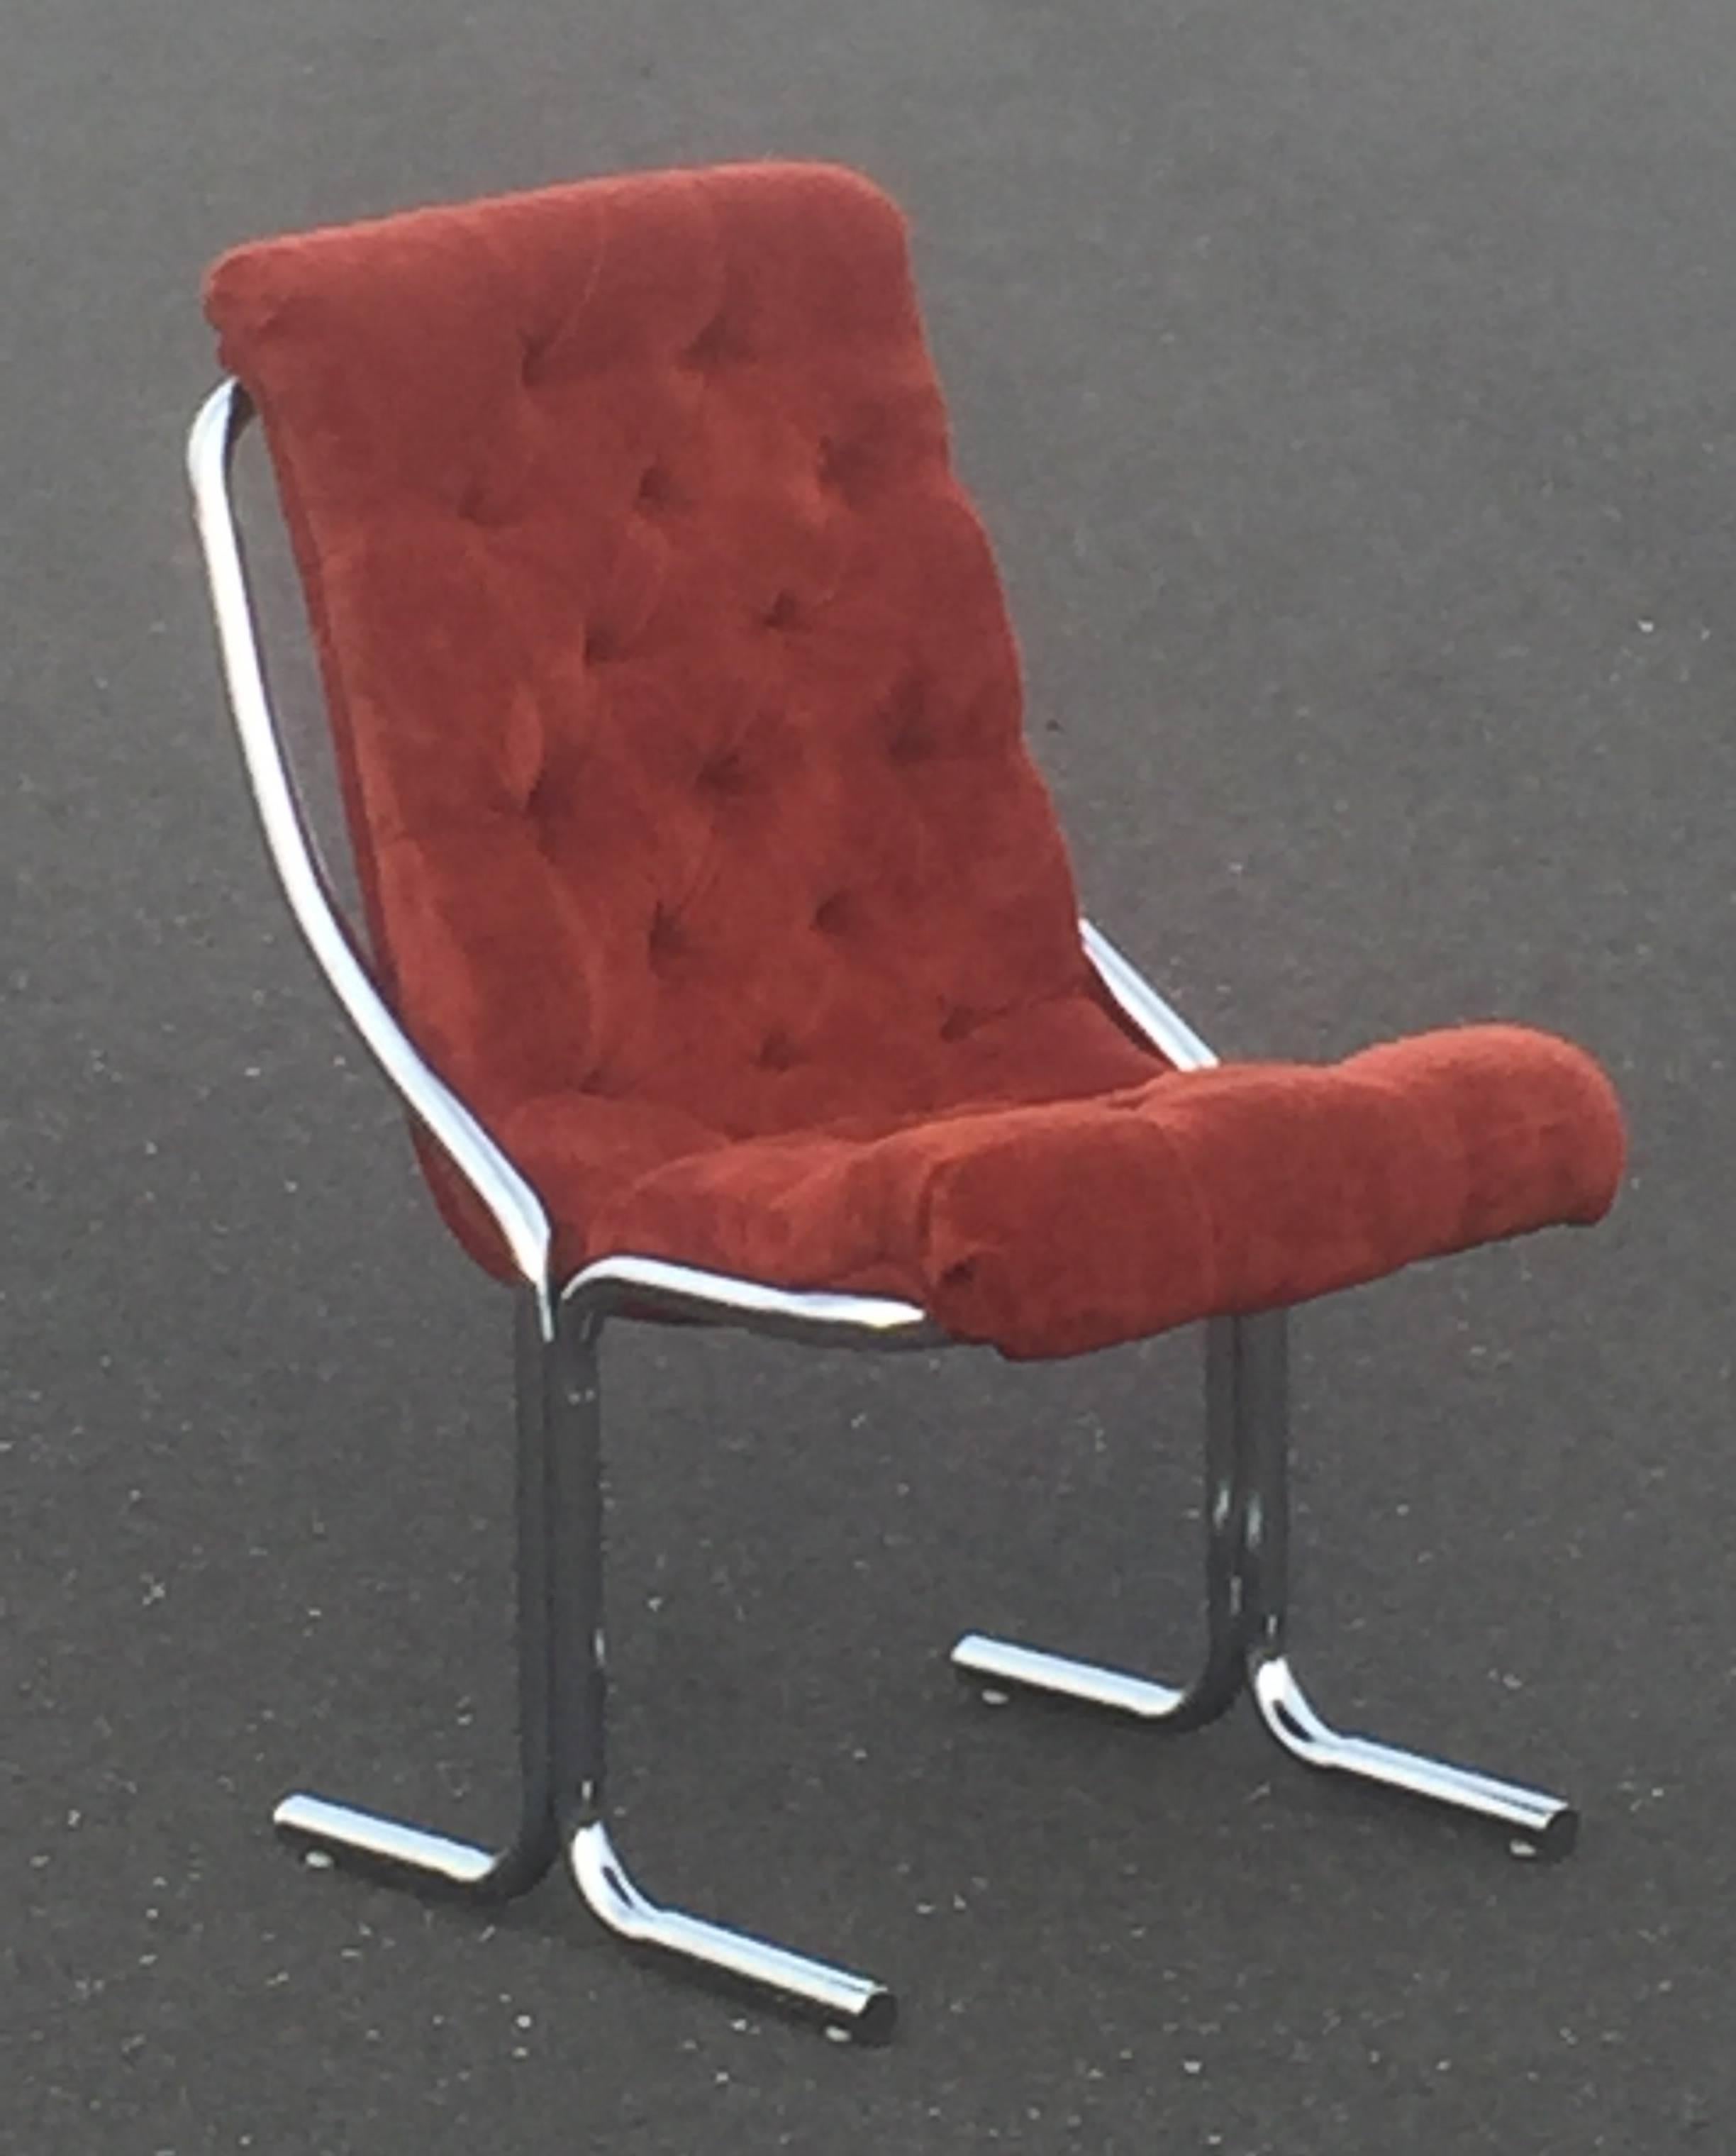 Very comfortable Mid-Century Modern dining chair, with such a sleek cool style they could be used as a pair of living room chairs as well. Chrome and burnt orange tufted velour. Will consider splitting the set up.
Seat height front 19